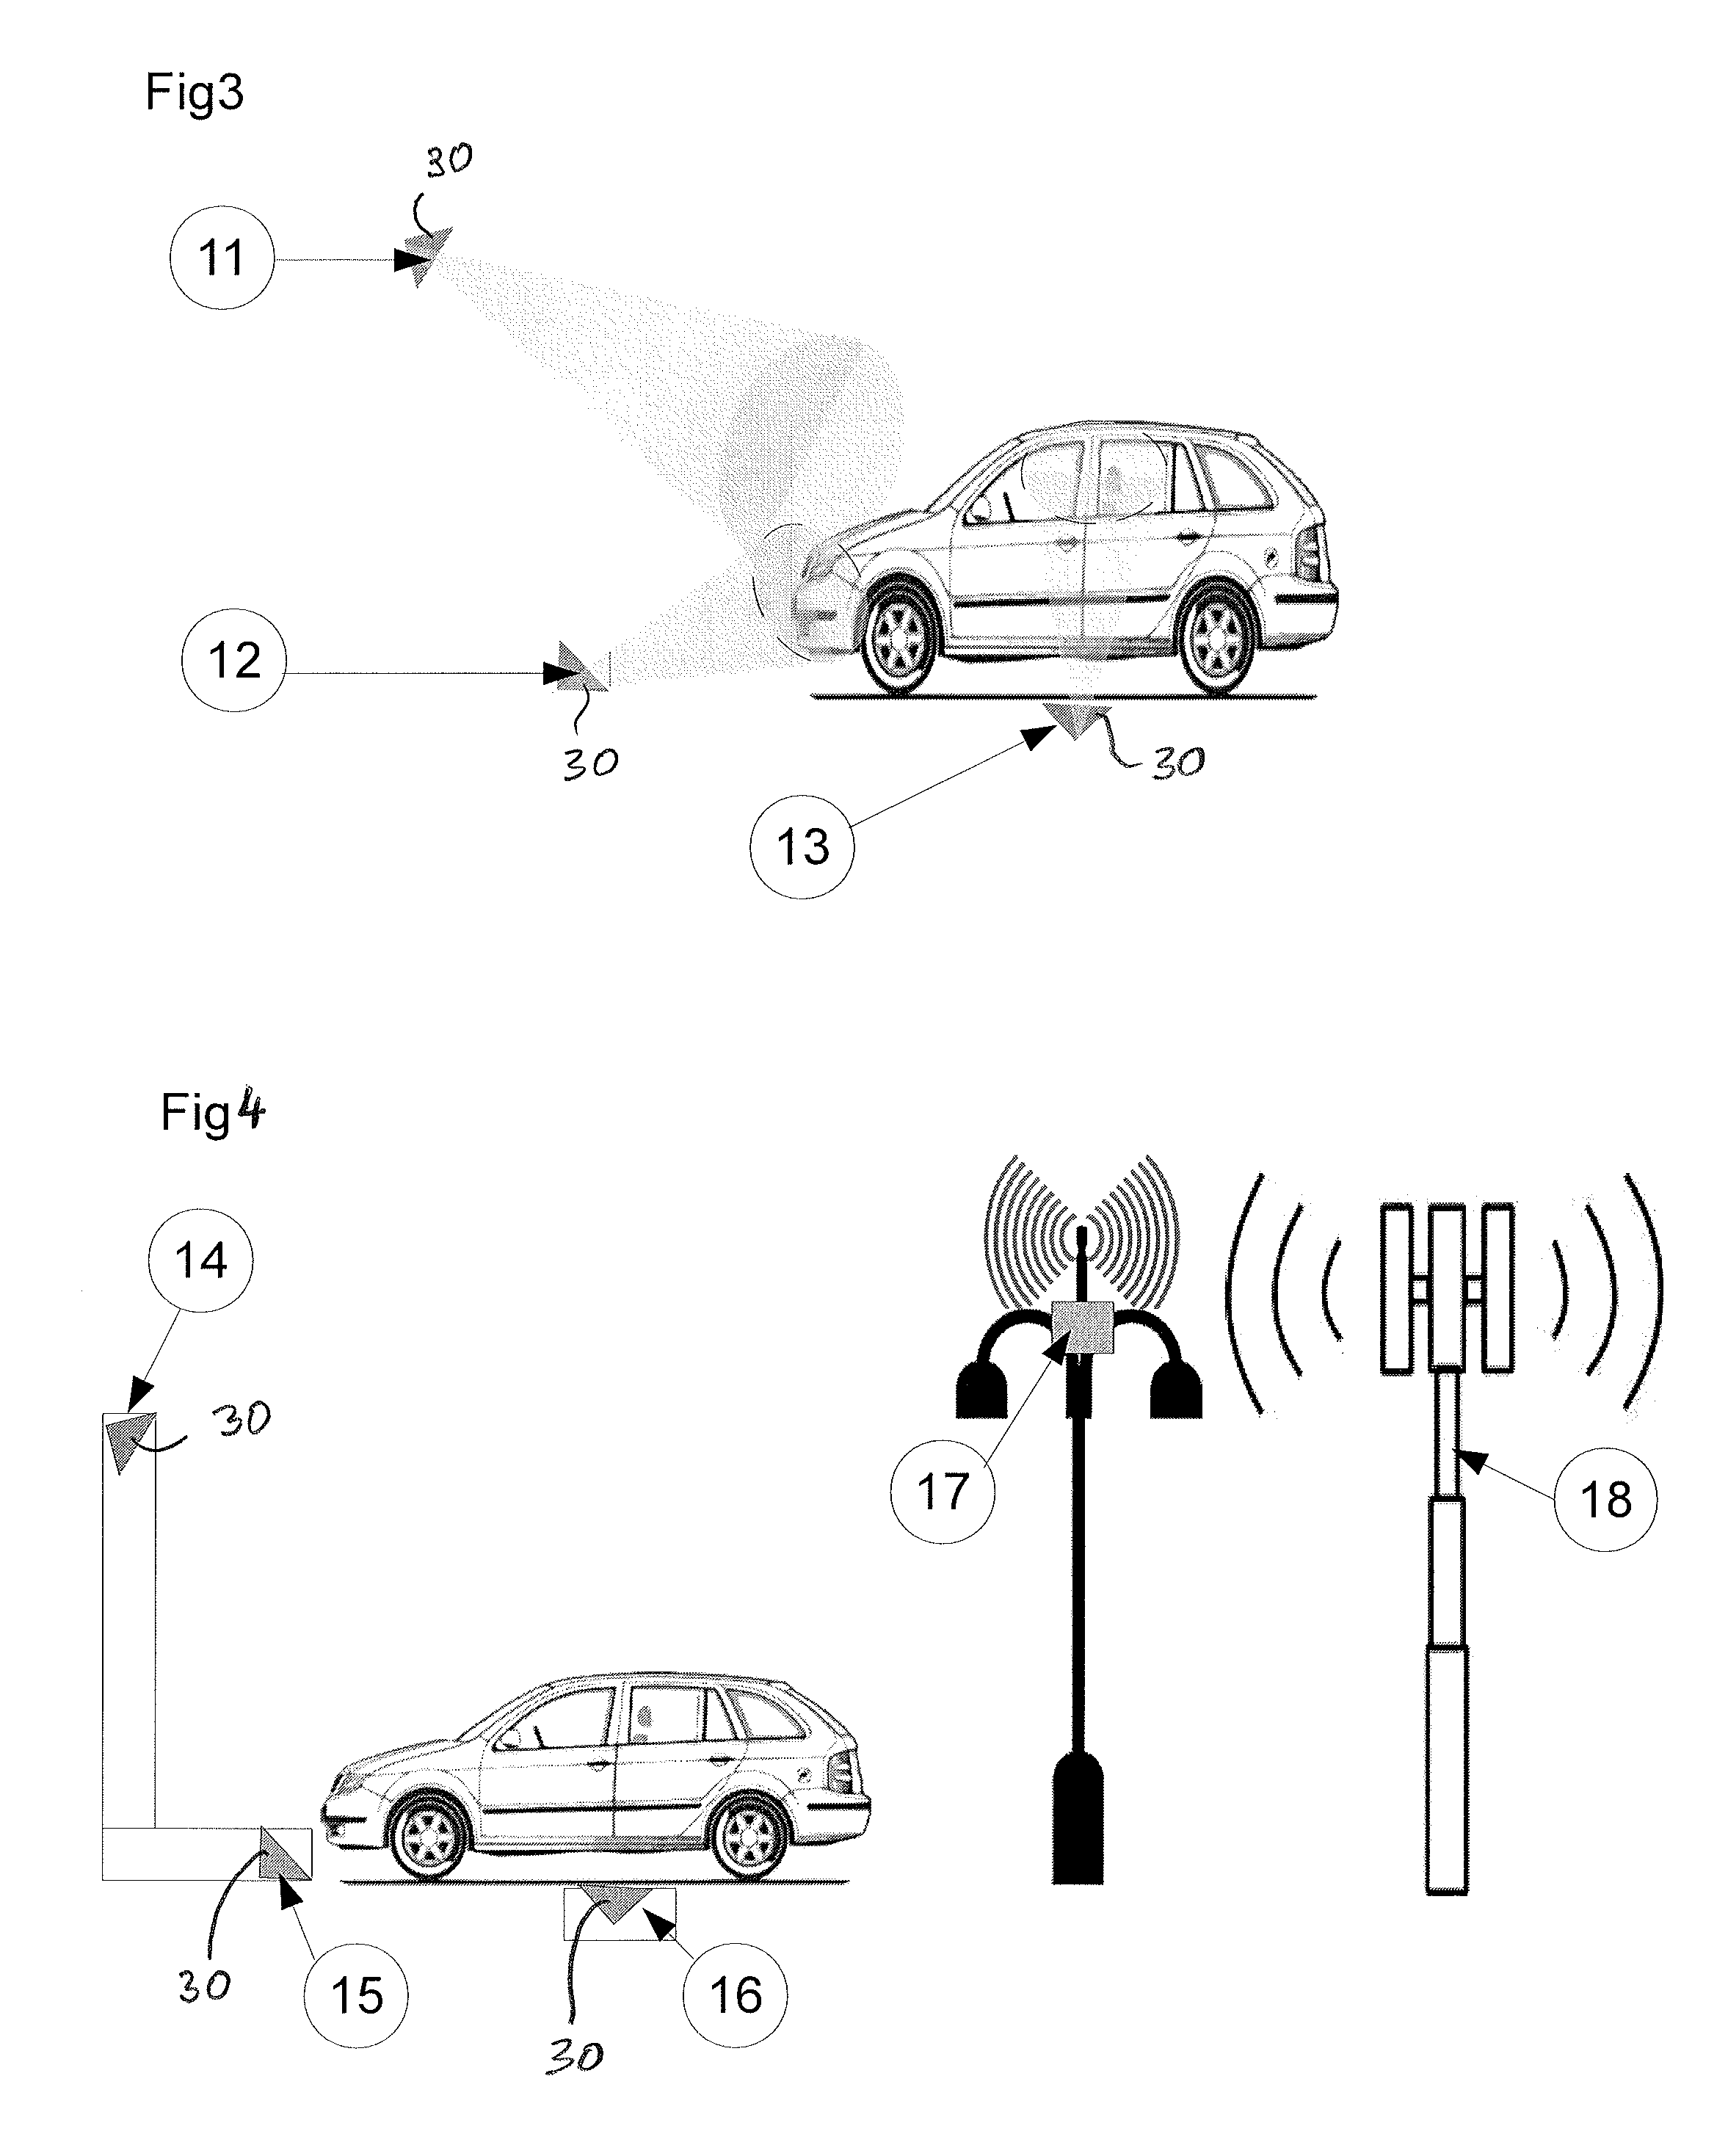 Directional speed and distance sensor